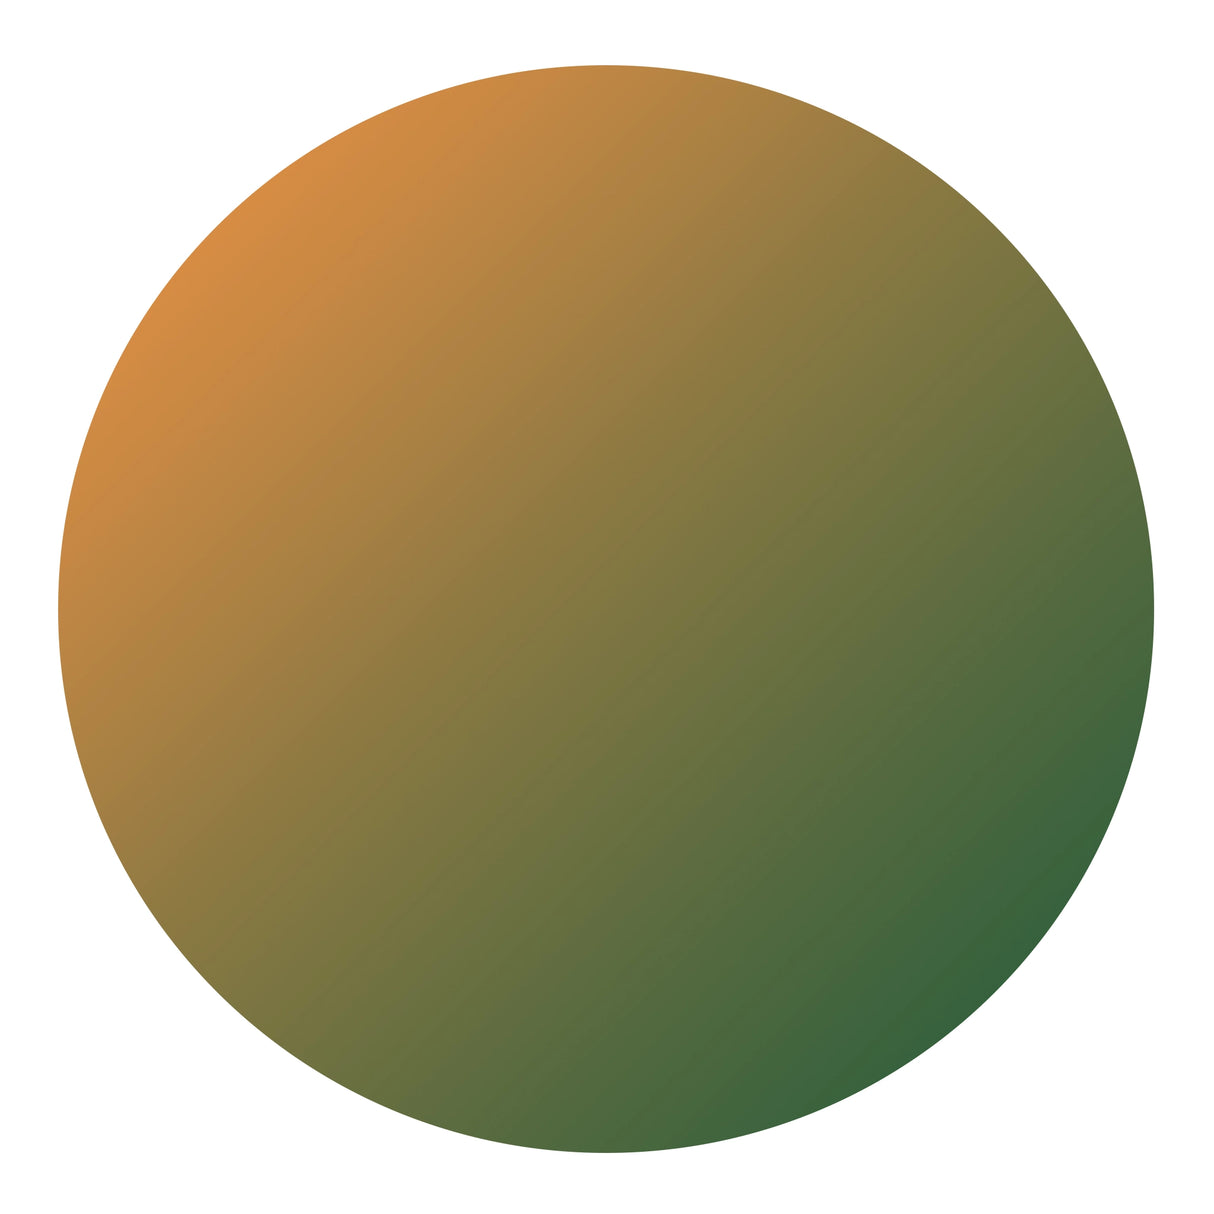 Permanent Vinyl Cold Color Change PV - Yellow to Deep Green